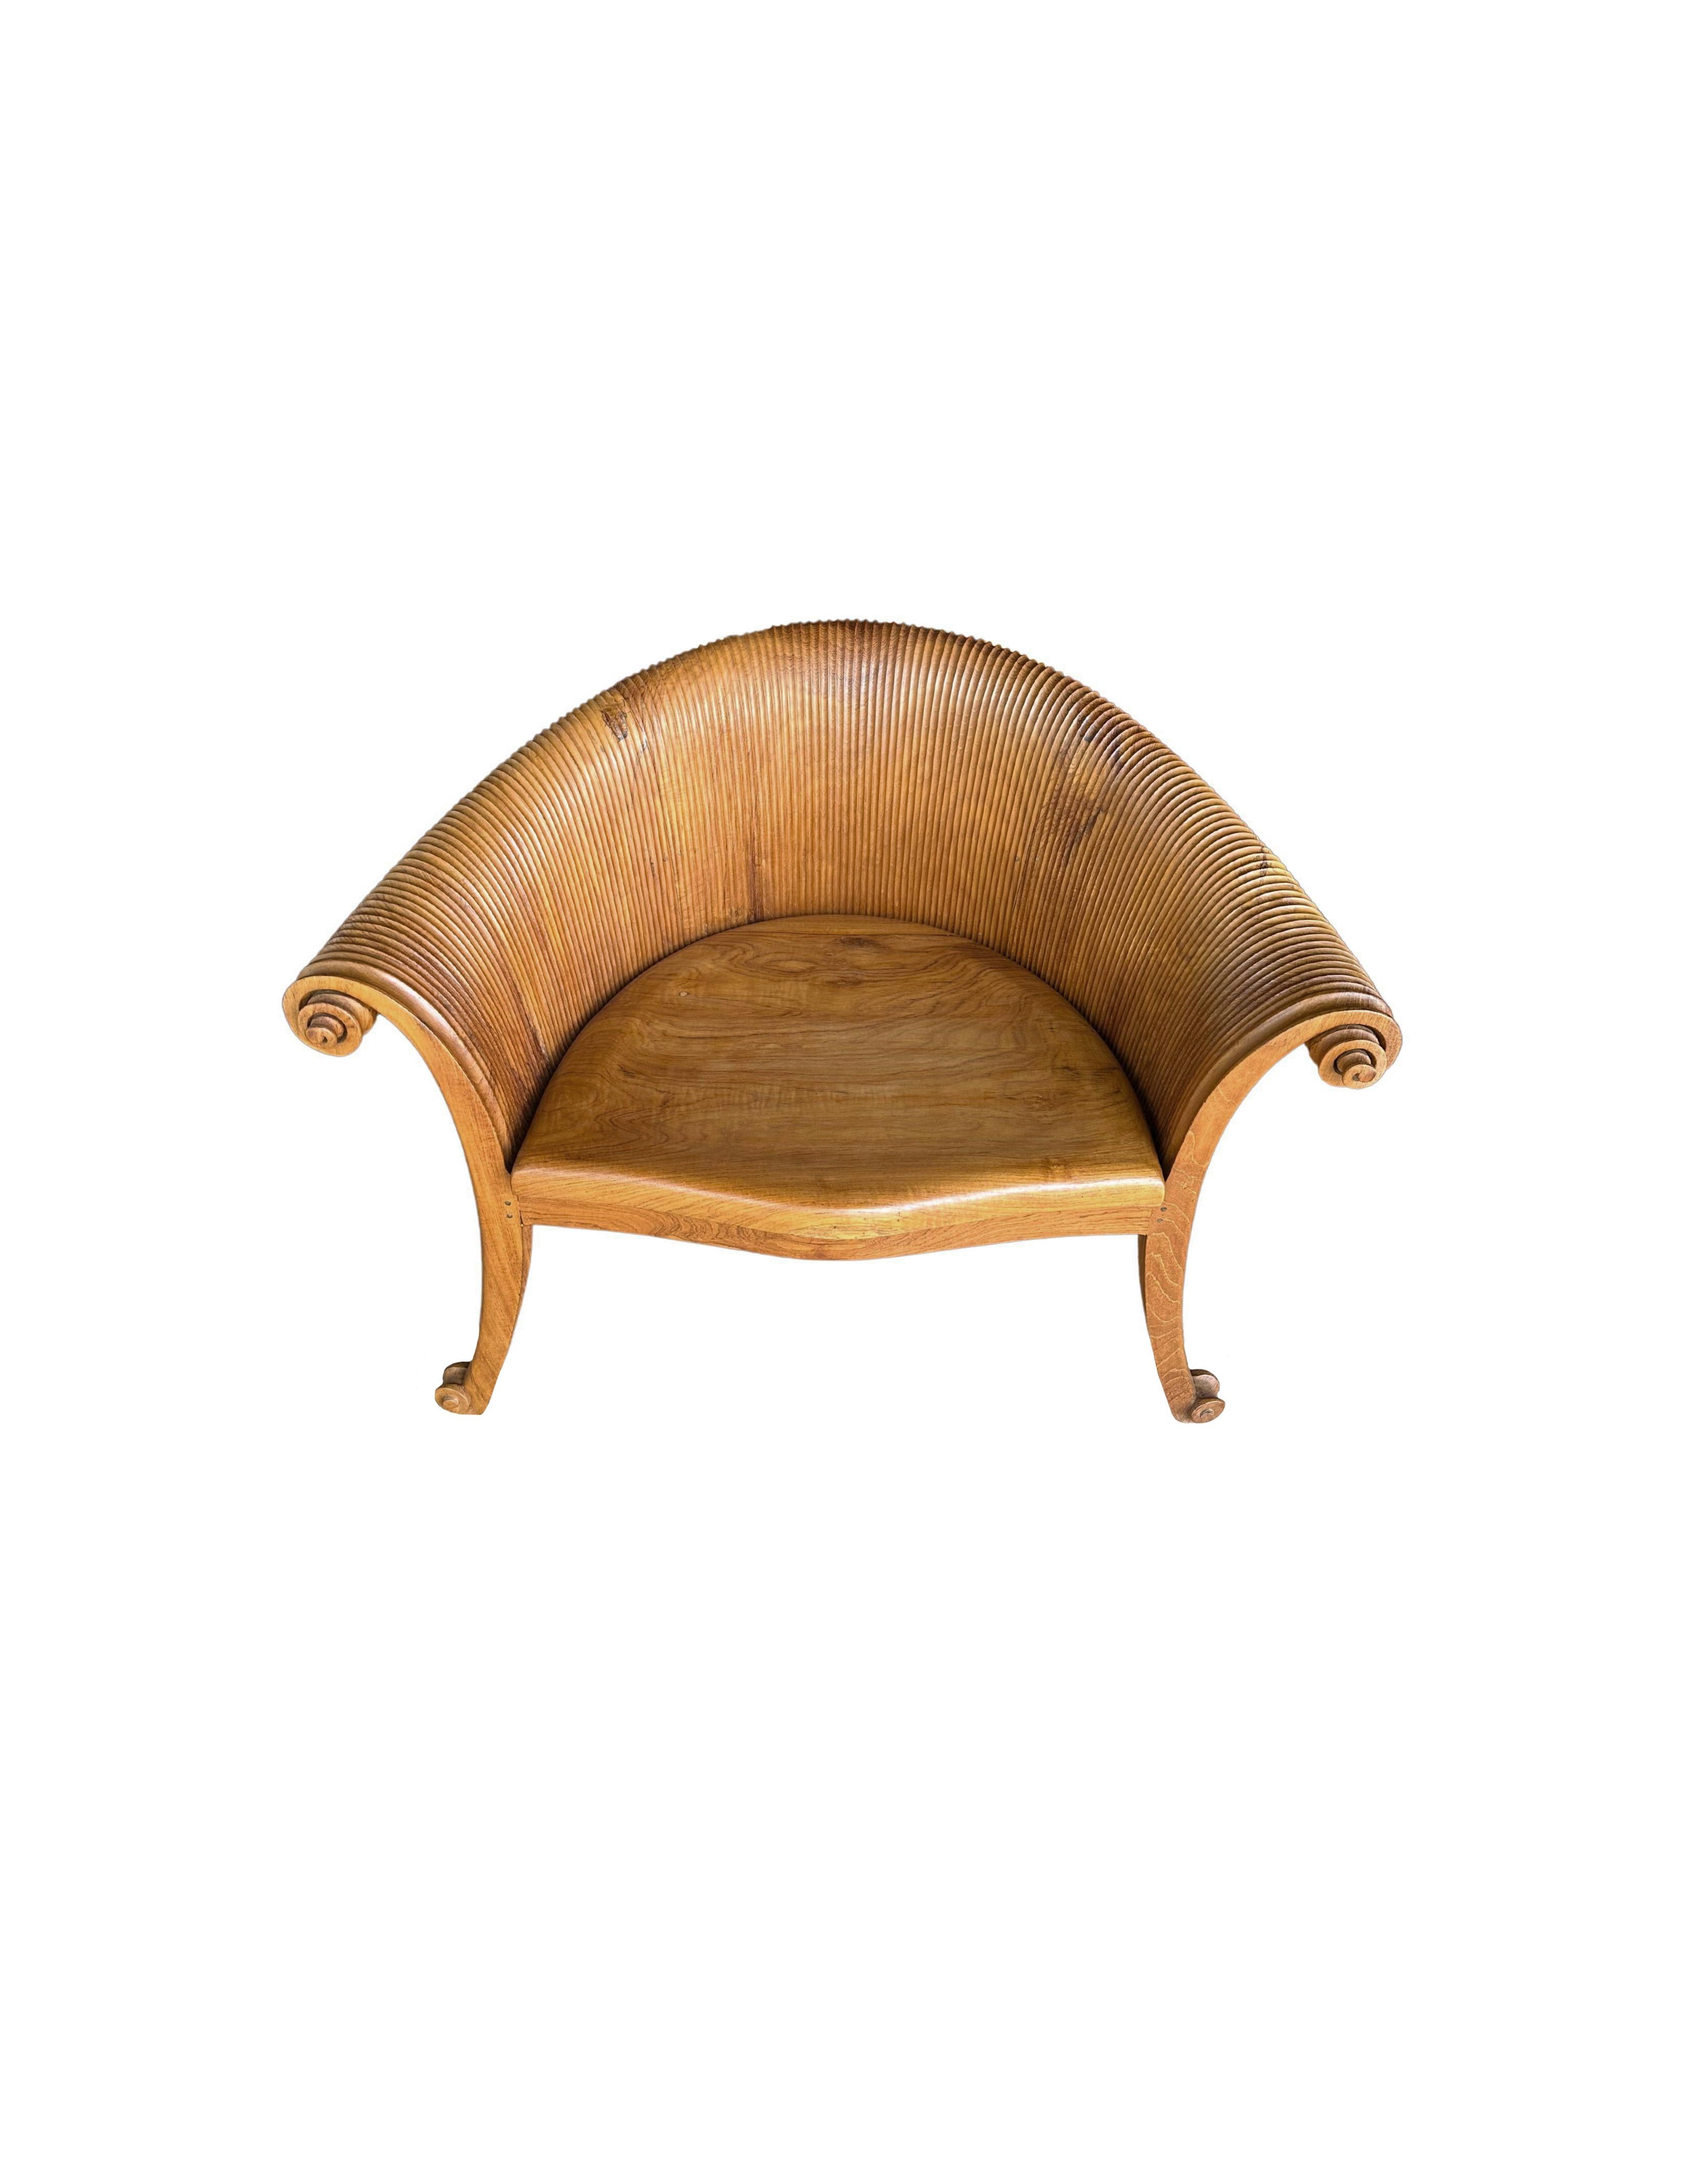 Organic Modern Sculptural Teak Wood Chair with Carved Detailing For Sale